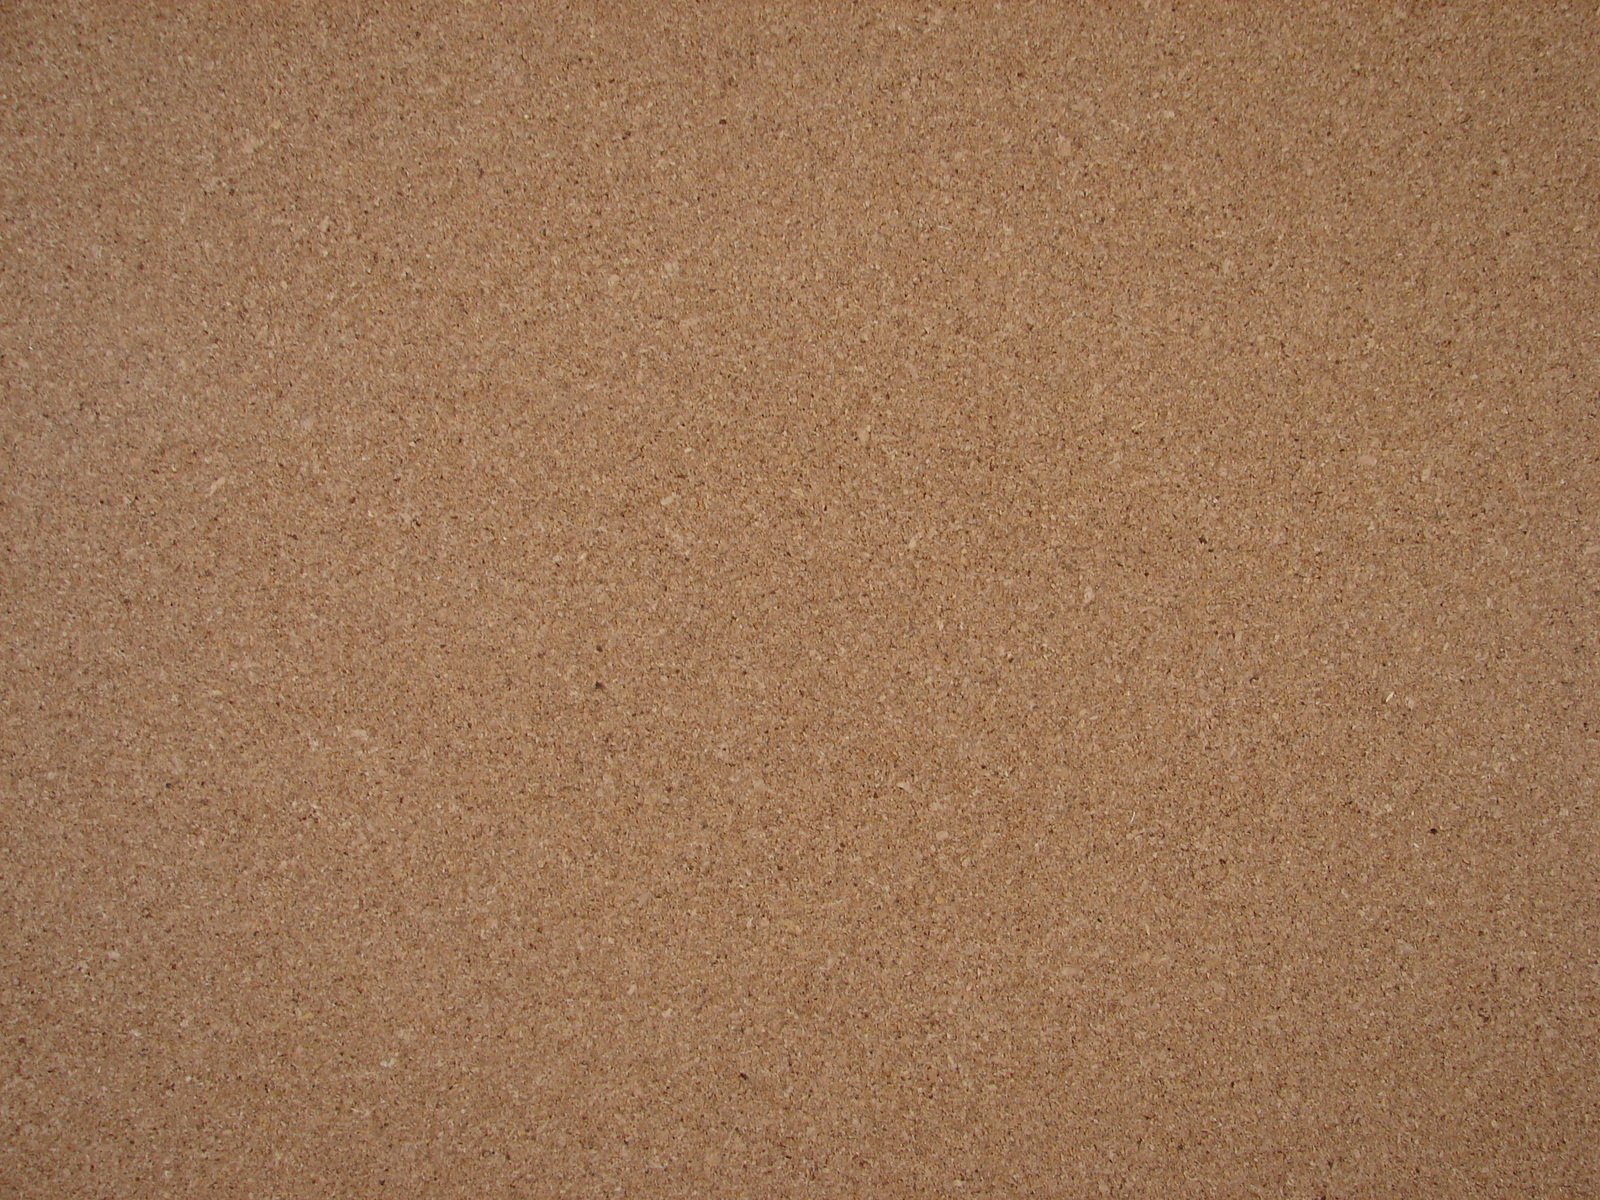 an image of a beige background with several tiny dots